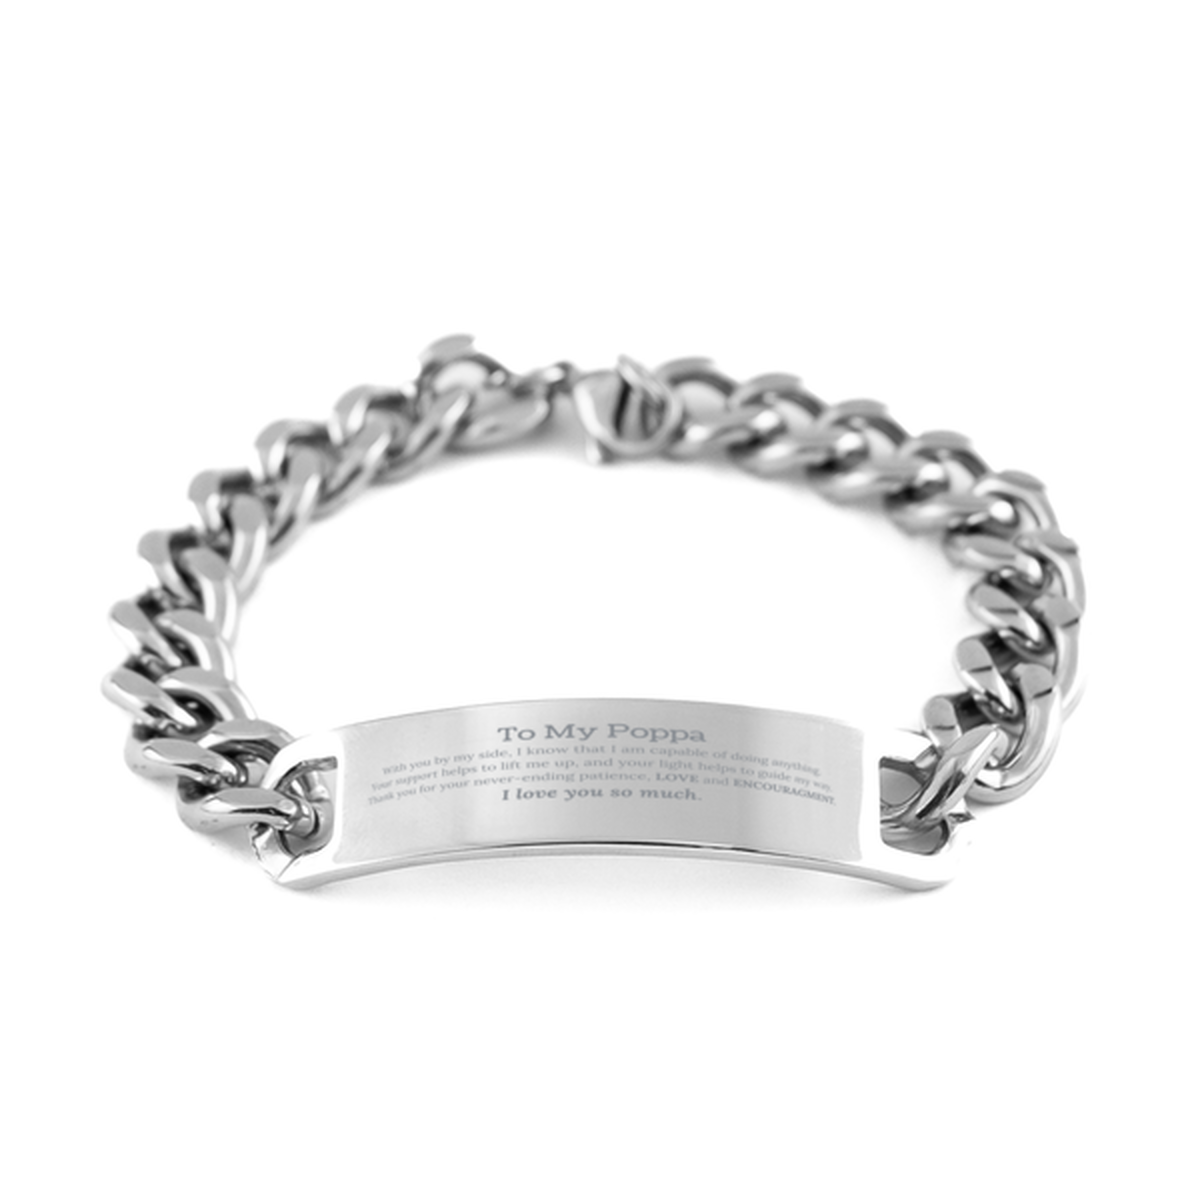 Appreciation Poppa Cuban Chain Stainless Steel Bracelet Gifts, To My Poppa Birthday Christmas Wedding Keepsake Gifts for Poppa With you by my side, I know that I am capable of doing anything. I love you so much